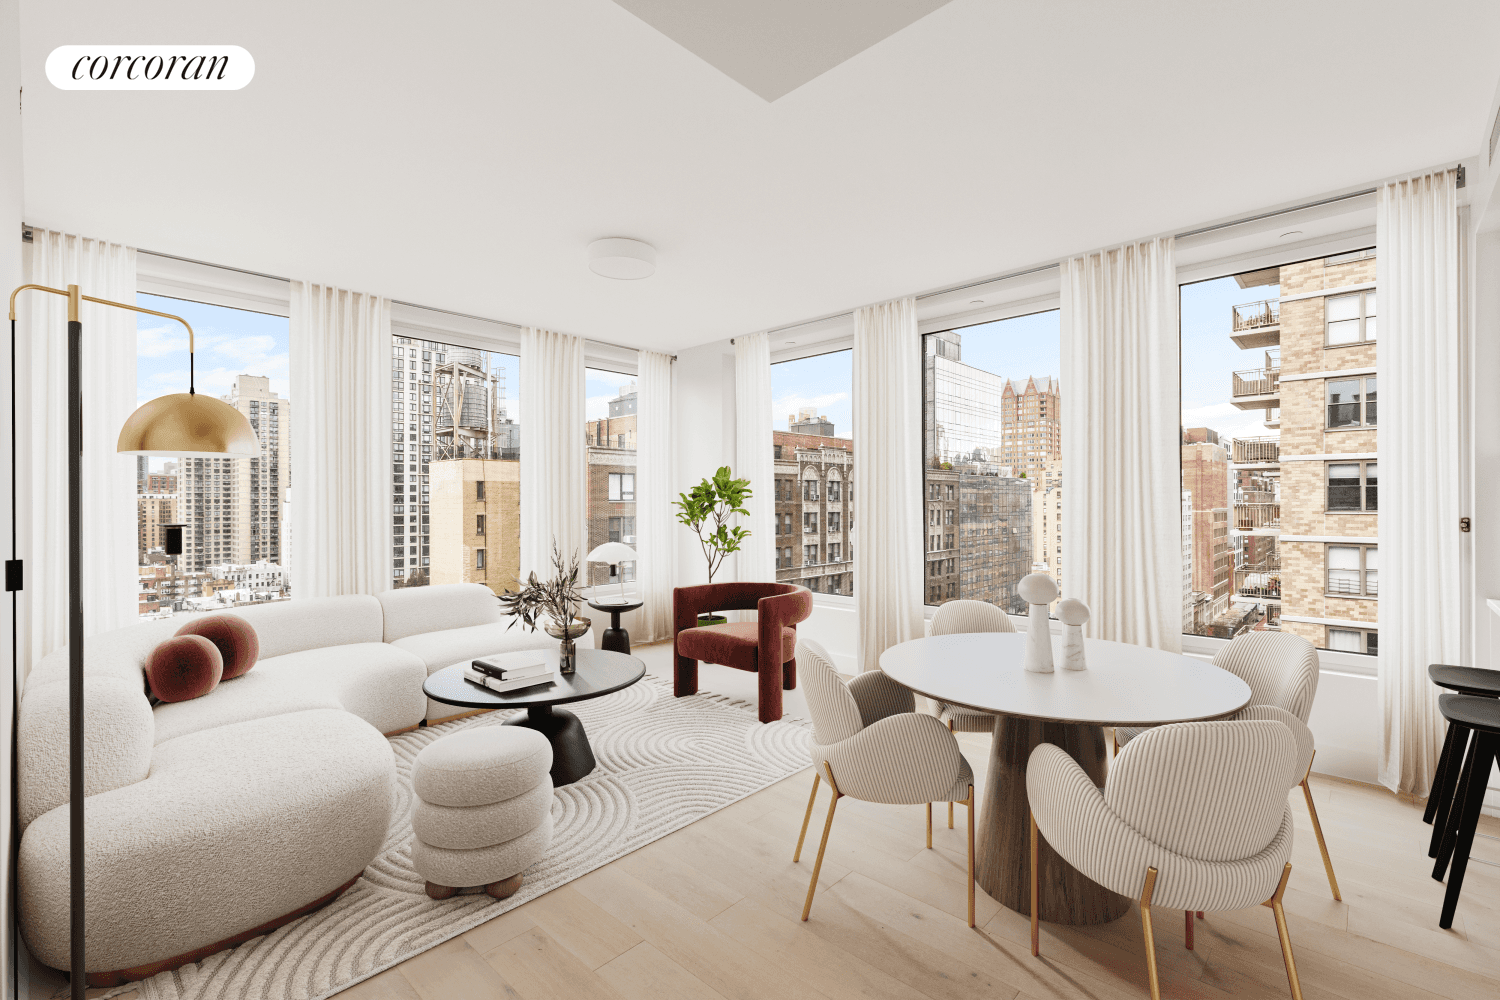 6th Floor at 323 East 79th StreetThree Bedrooms Two Baths Powder Room Private Outdoor Space 1, 856 sqft323 E 79th Street offers a blend of contemporary elegance and modern comfort ...